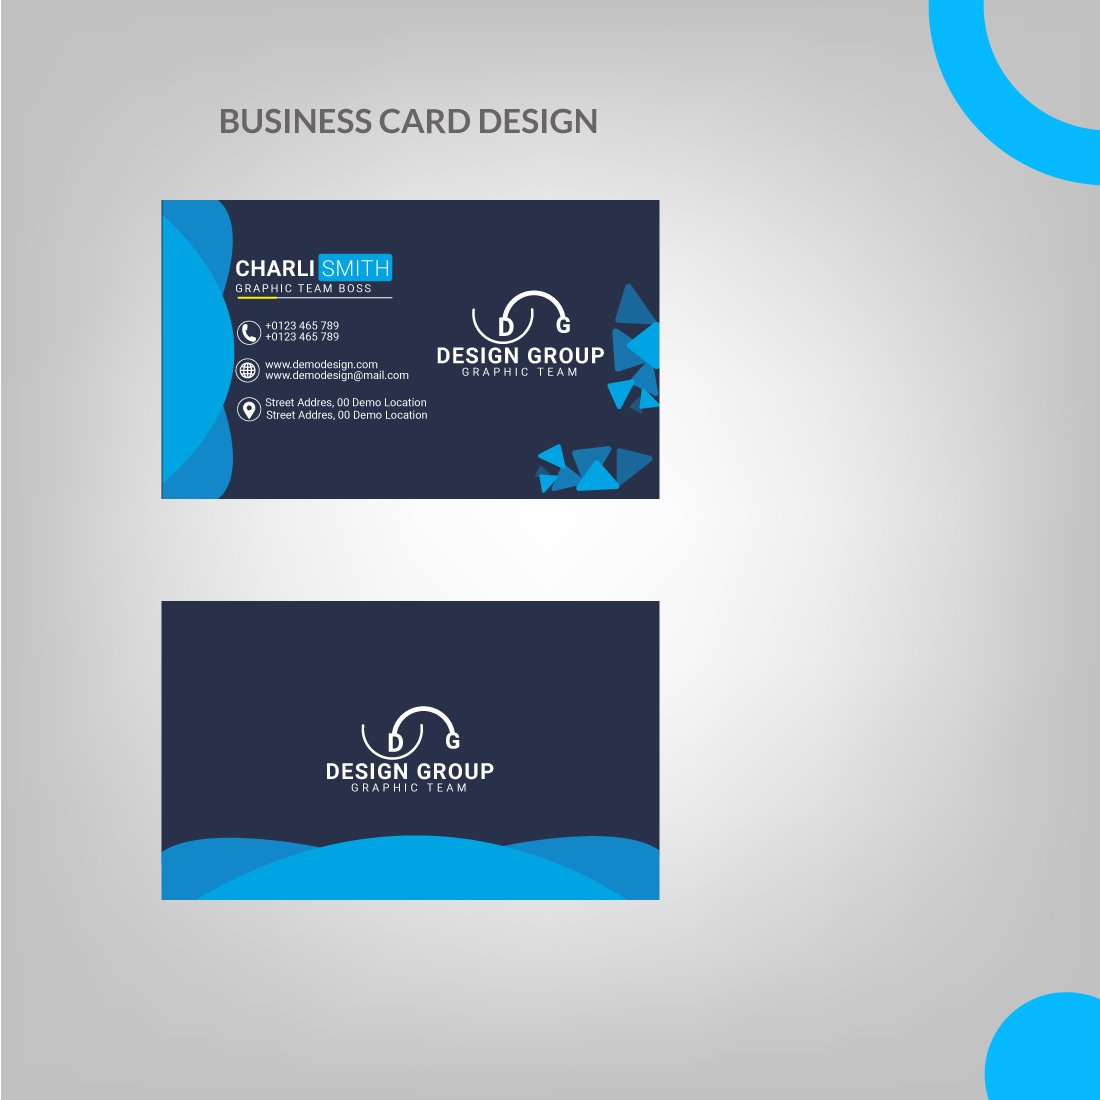 Business card design, Business Card, visiting card design cover image.